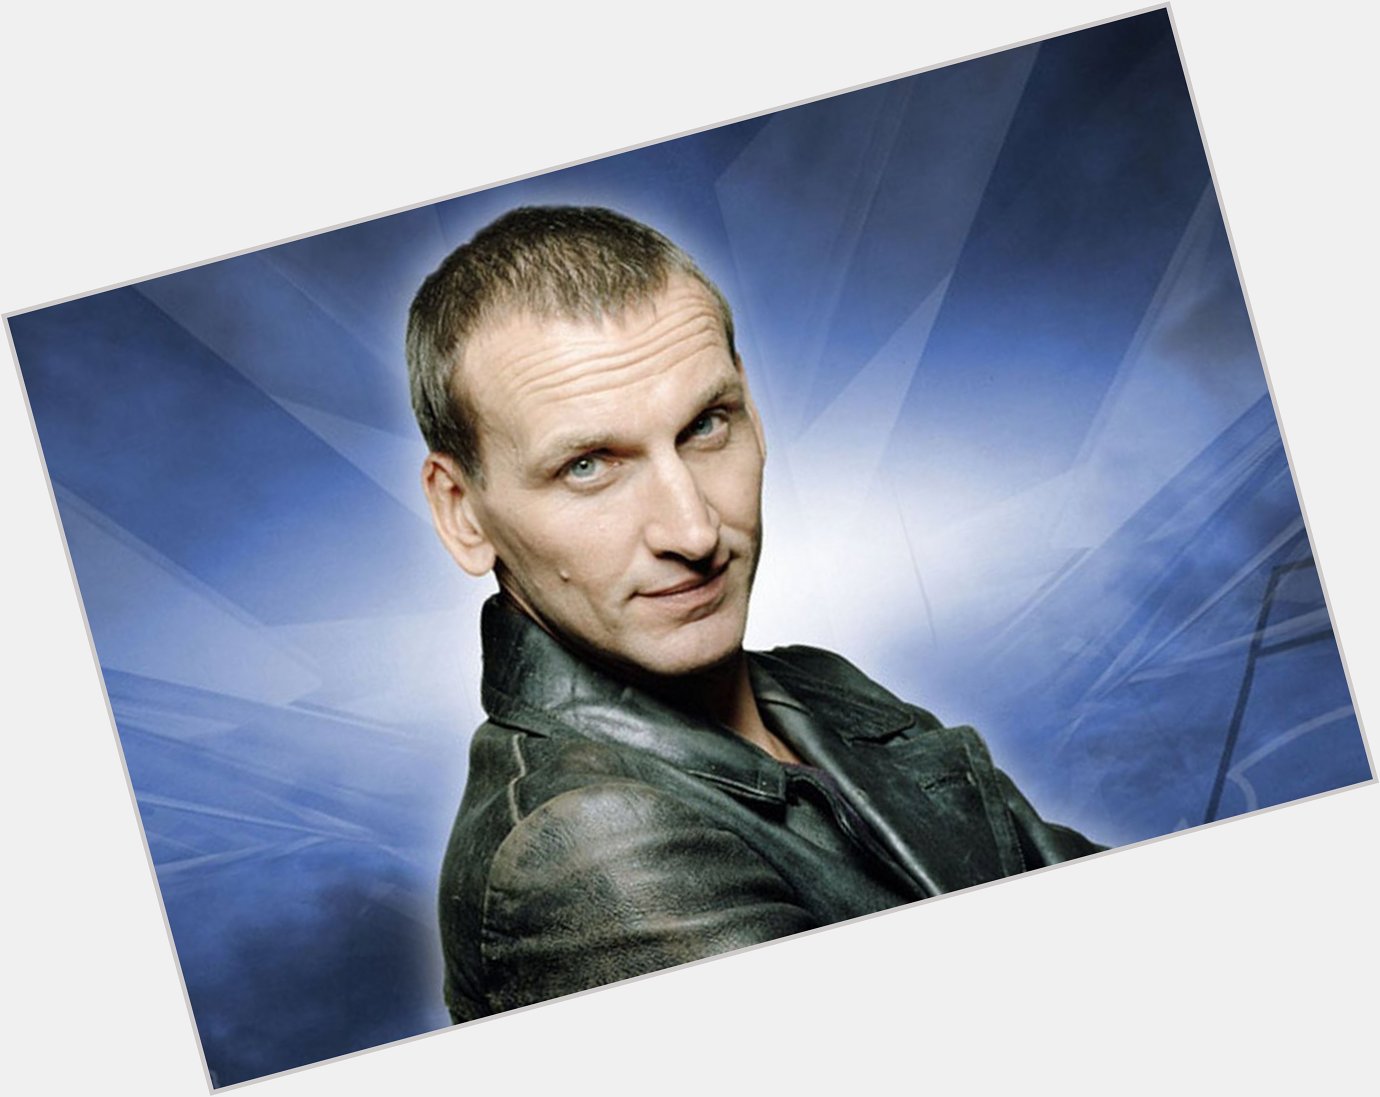 Happy Birthday, Christopher Eccleston. The man who introduced me to 